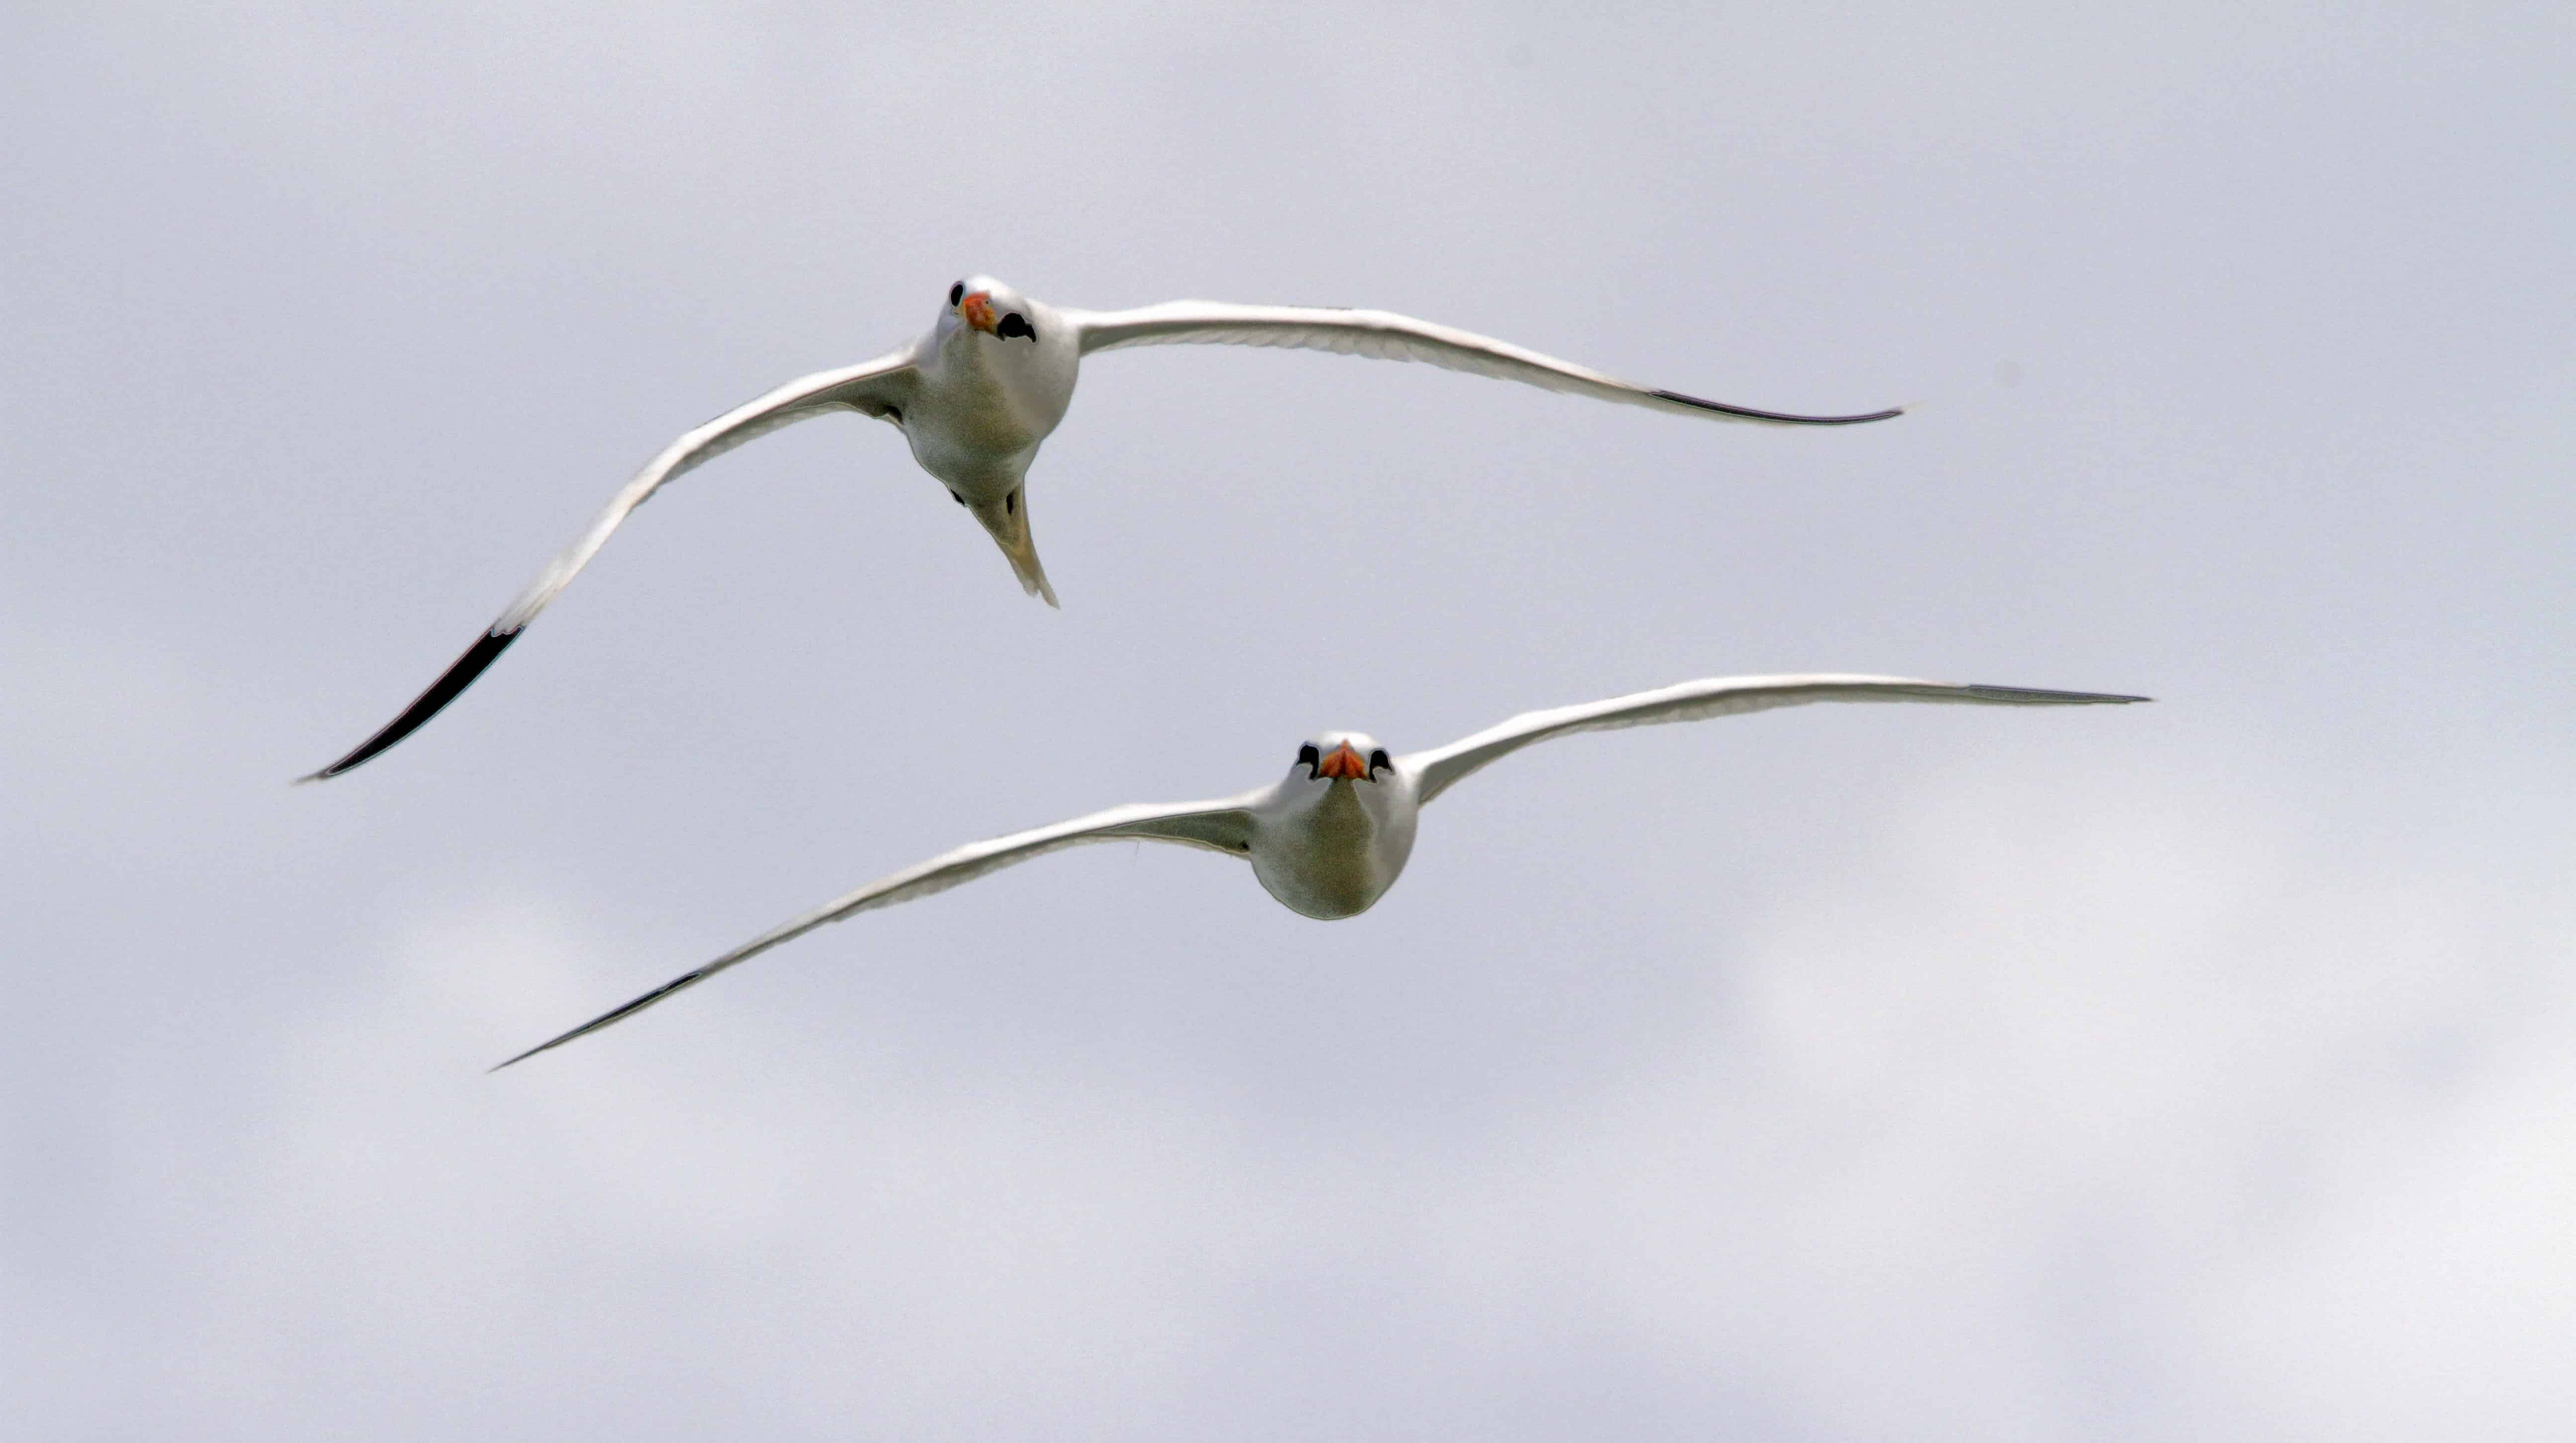 Pair of white-tailed tropicbirds in display, Middle Caicos. Copyright: Dr Mike Pienkowski